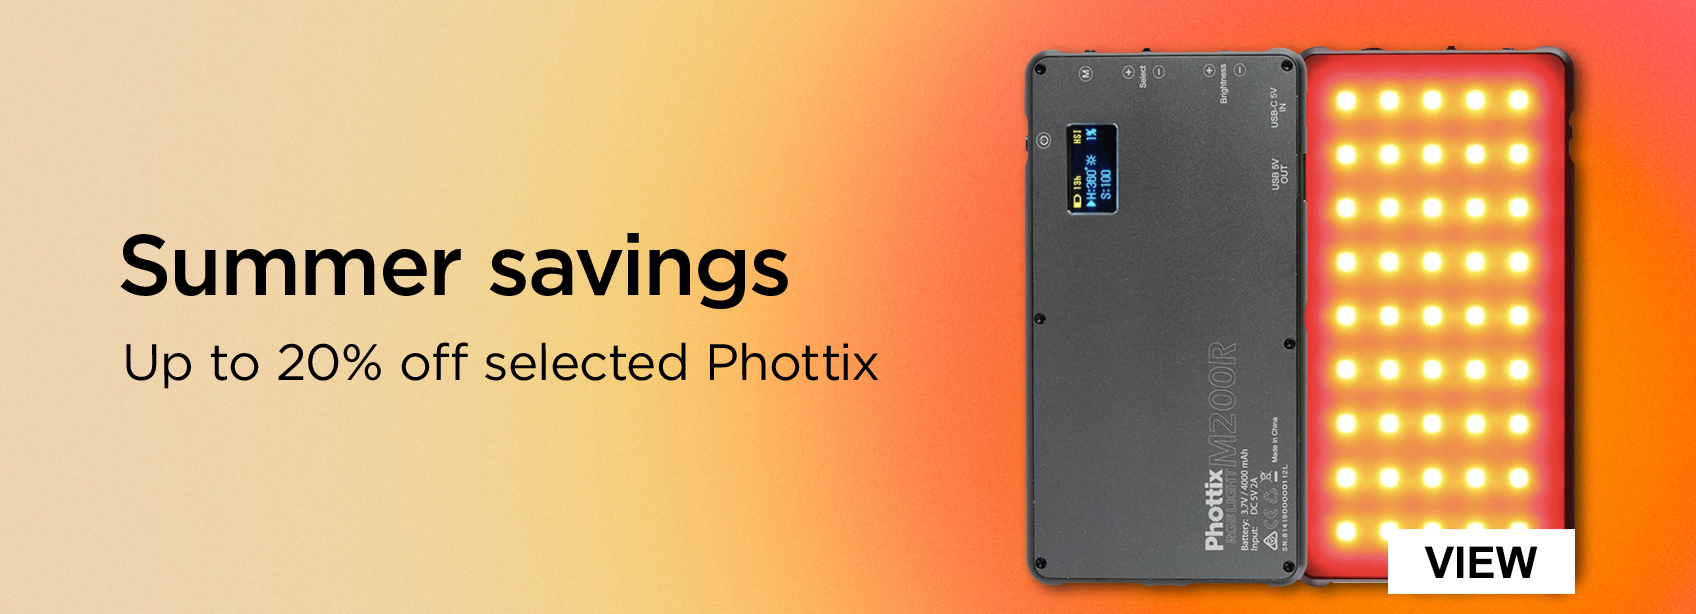 Phottix Summer Offers | Save up to 20% Off